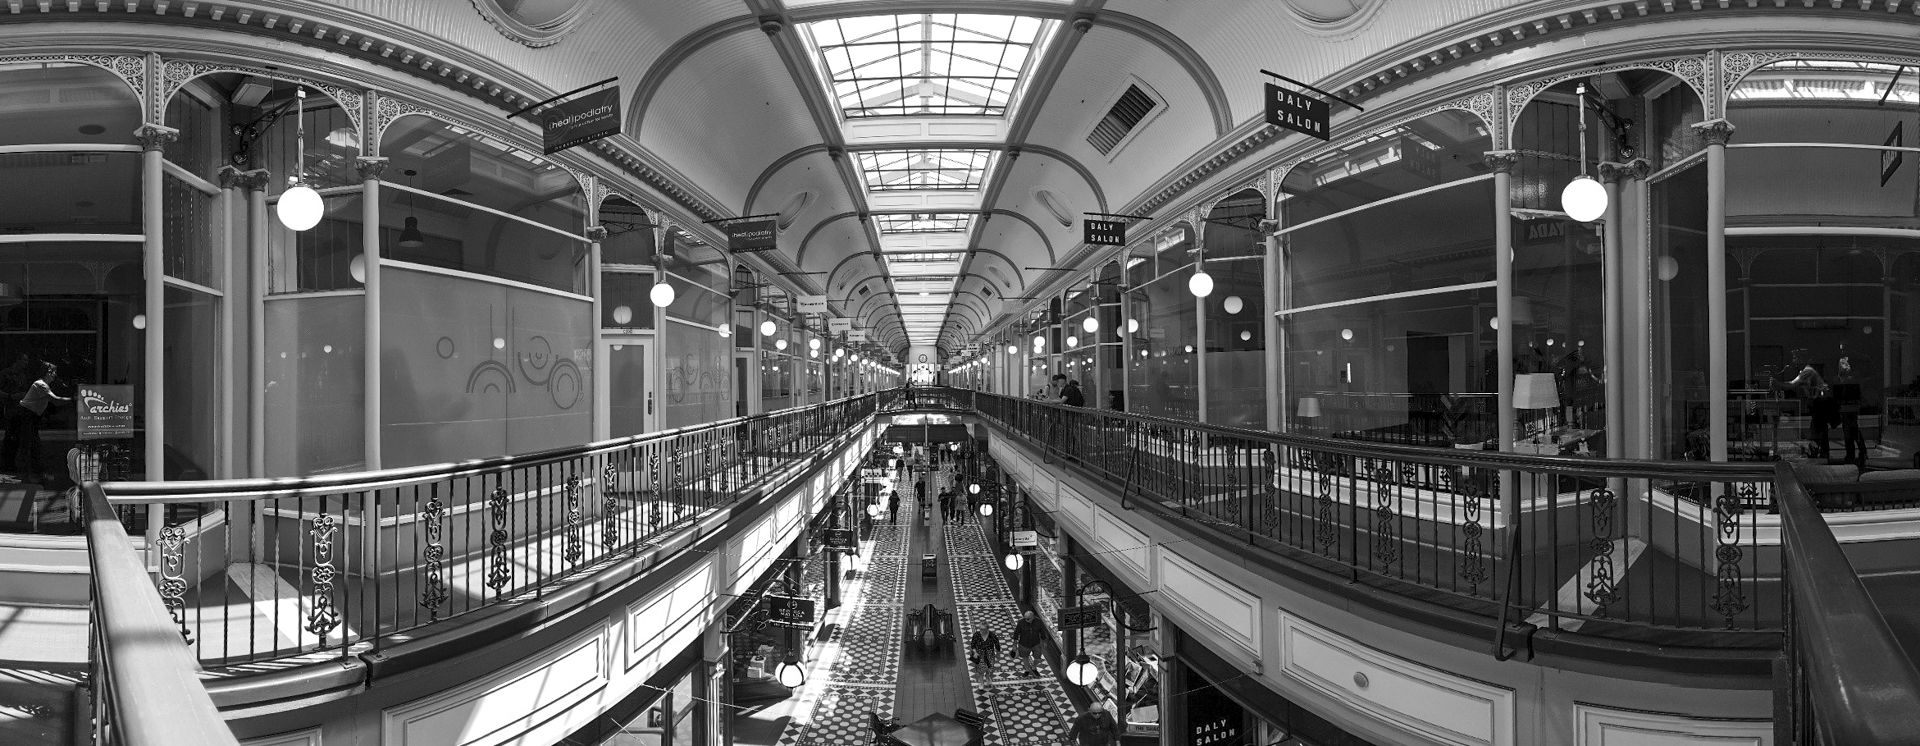 Anthony Berni Highly Commended Adelaide Arcade Pano June 2020   Phone Photography